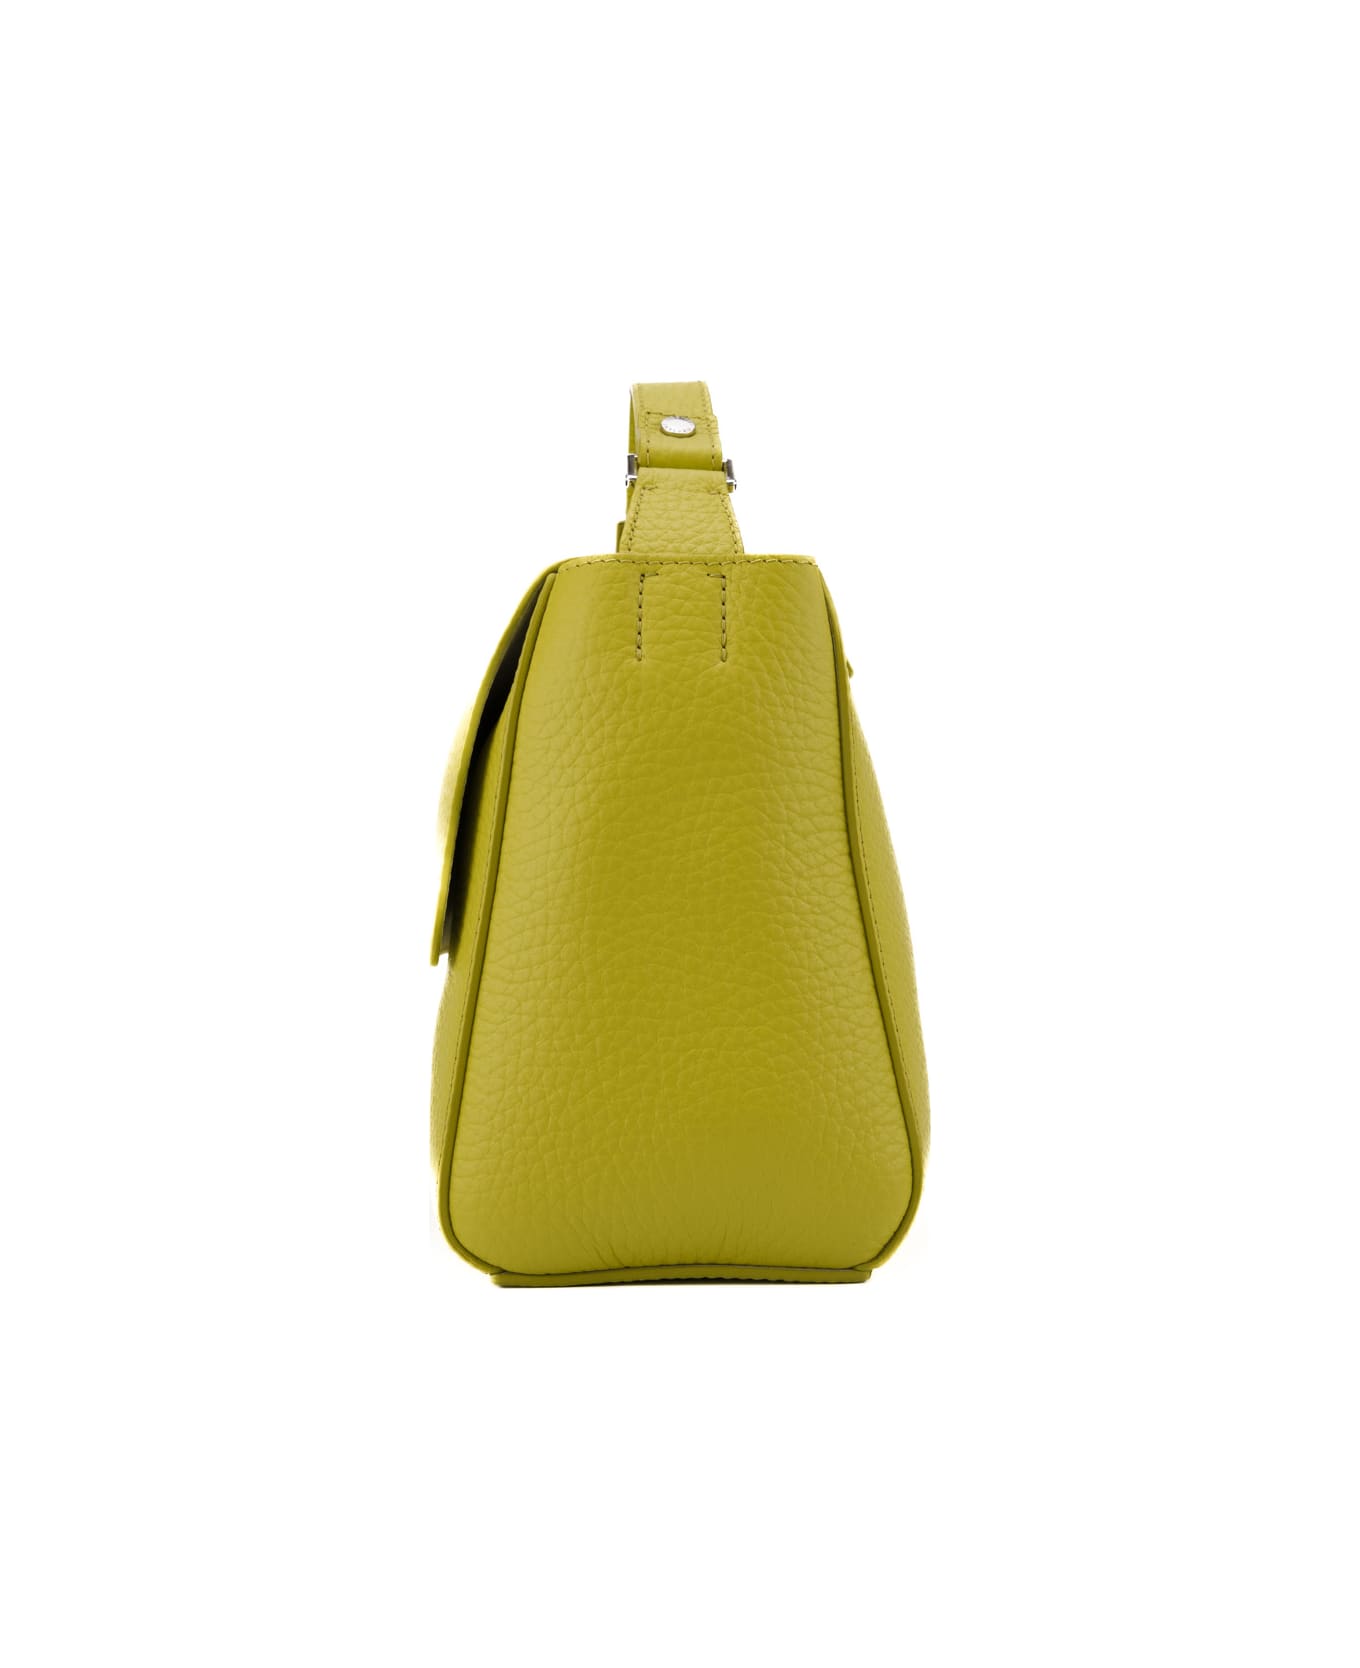 Orciani Small Sveva Soft Bag In Textured Leather - Giallo トートバッグ